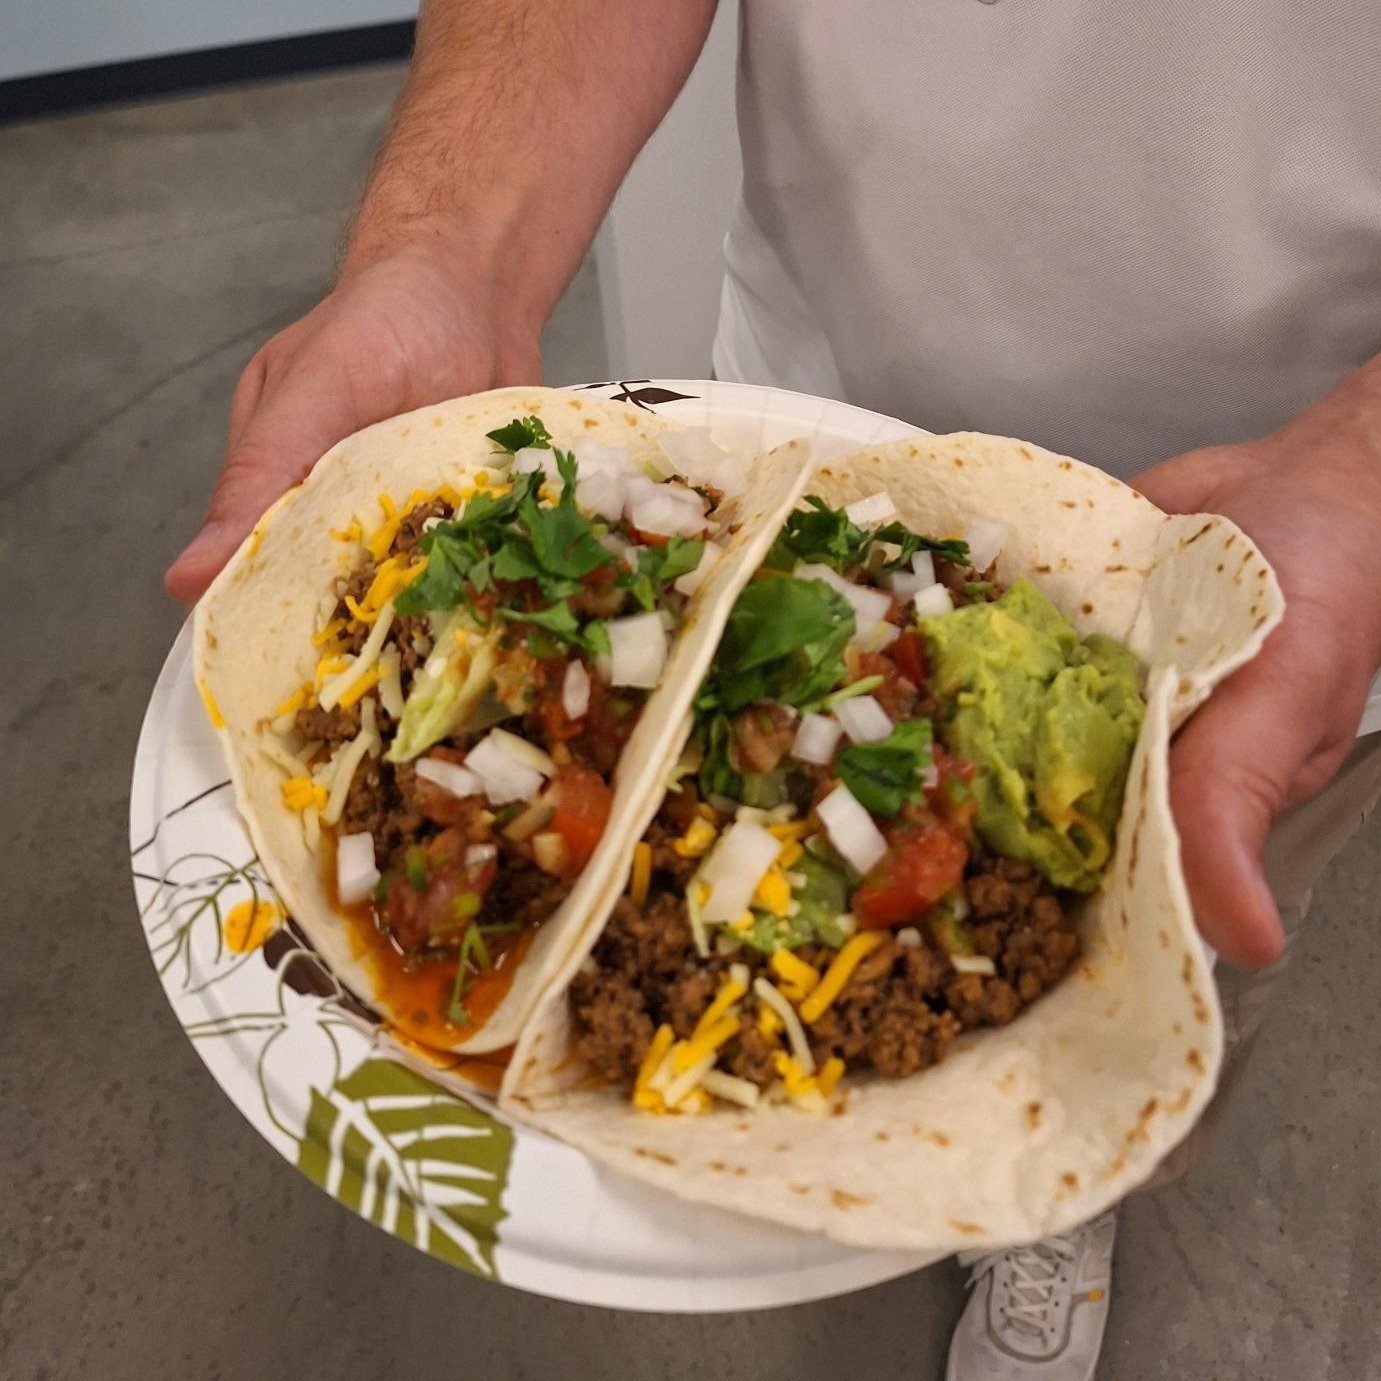 Since #cincodemayo fell over the weekend, our social committee opted for a belated celebration with a potluck-style #TacoTuesday. We enjoyed all the fixings, including delicious homemade salsa by our Co-CEO and President, Tony Smith. But the real hig